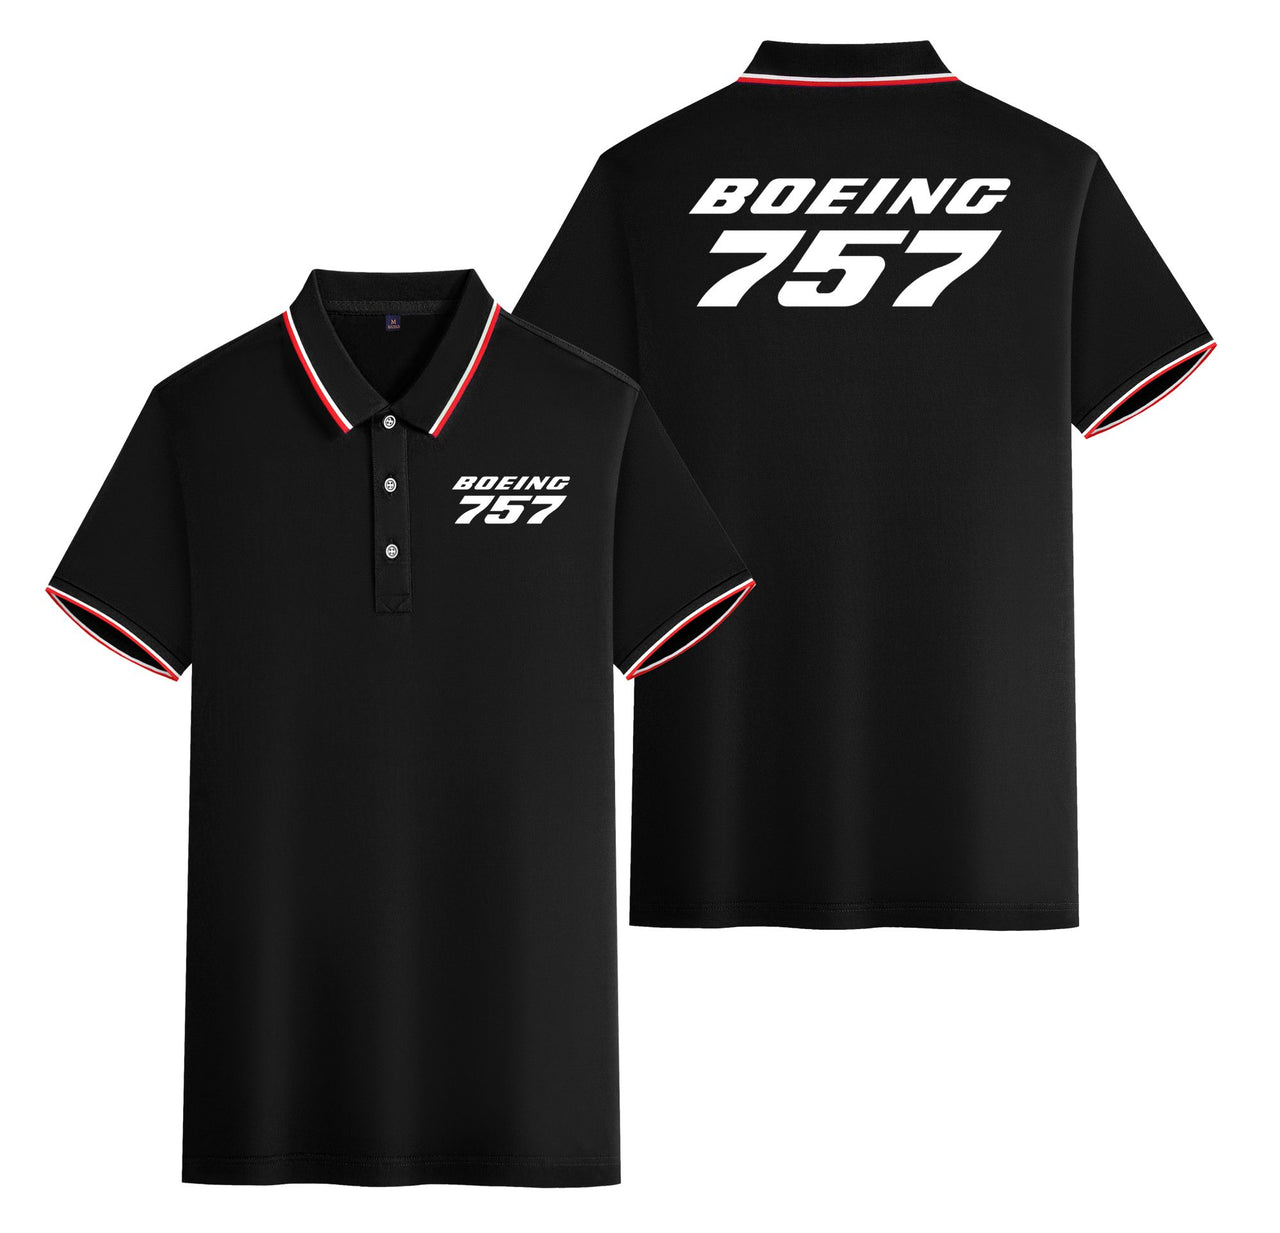 Boeing 757 & Text Designed Stylish Polo T-Shirts (Double-Side)